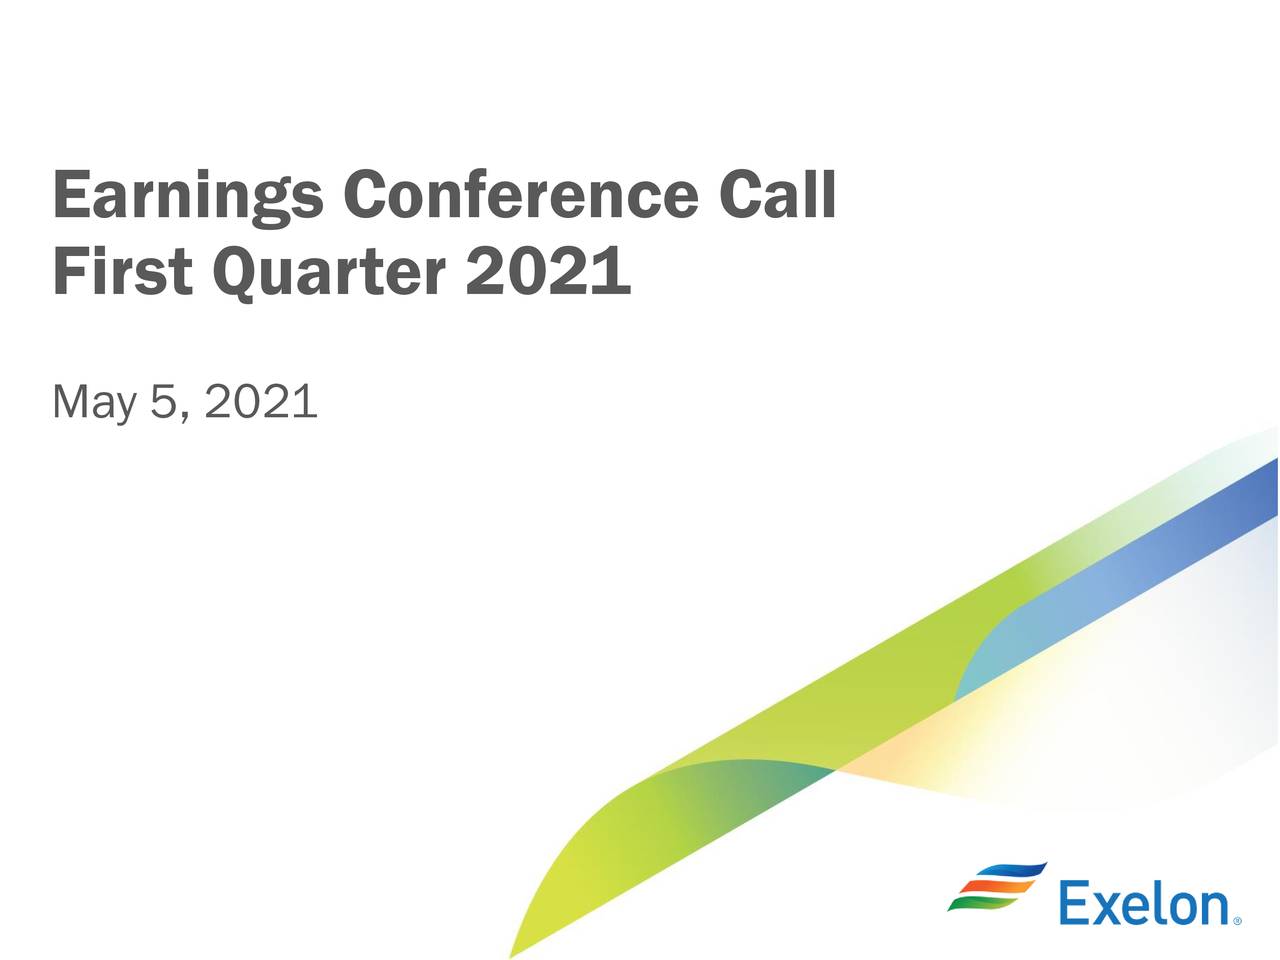 Earnings Conference Call